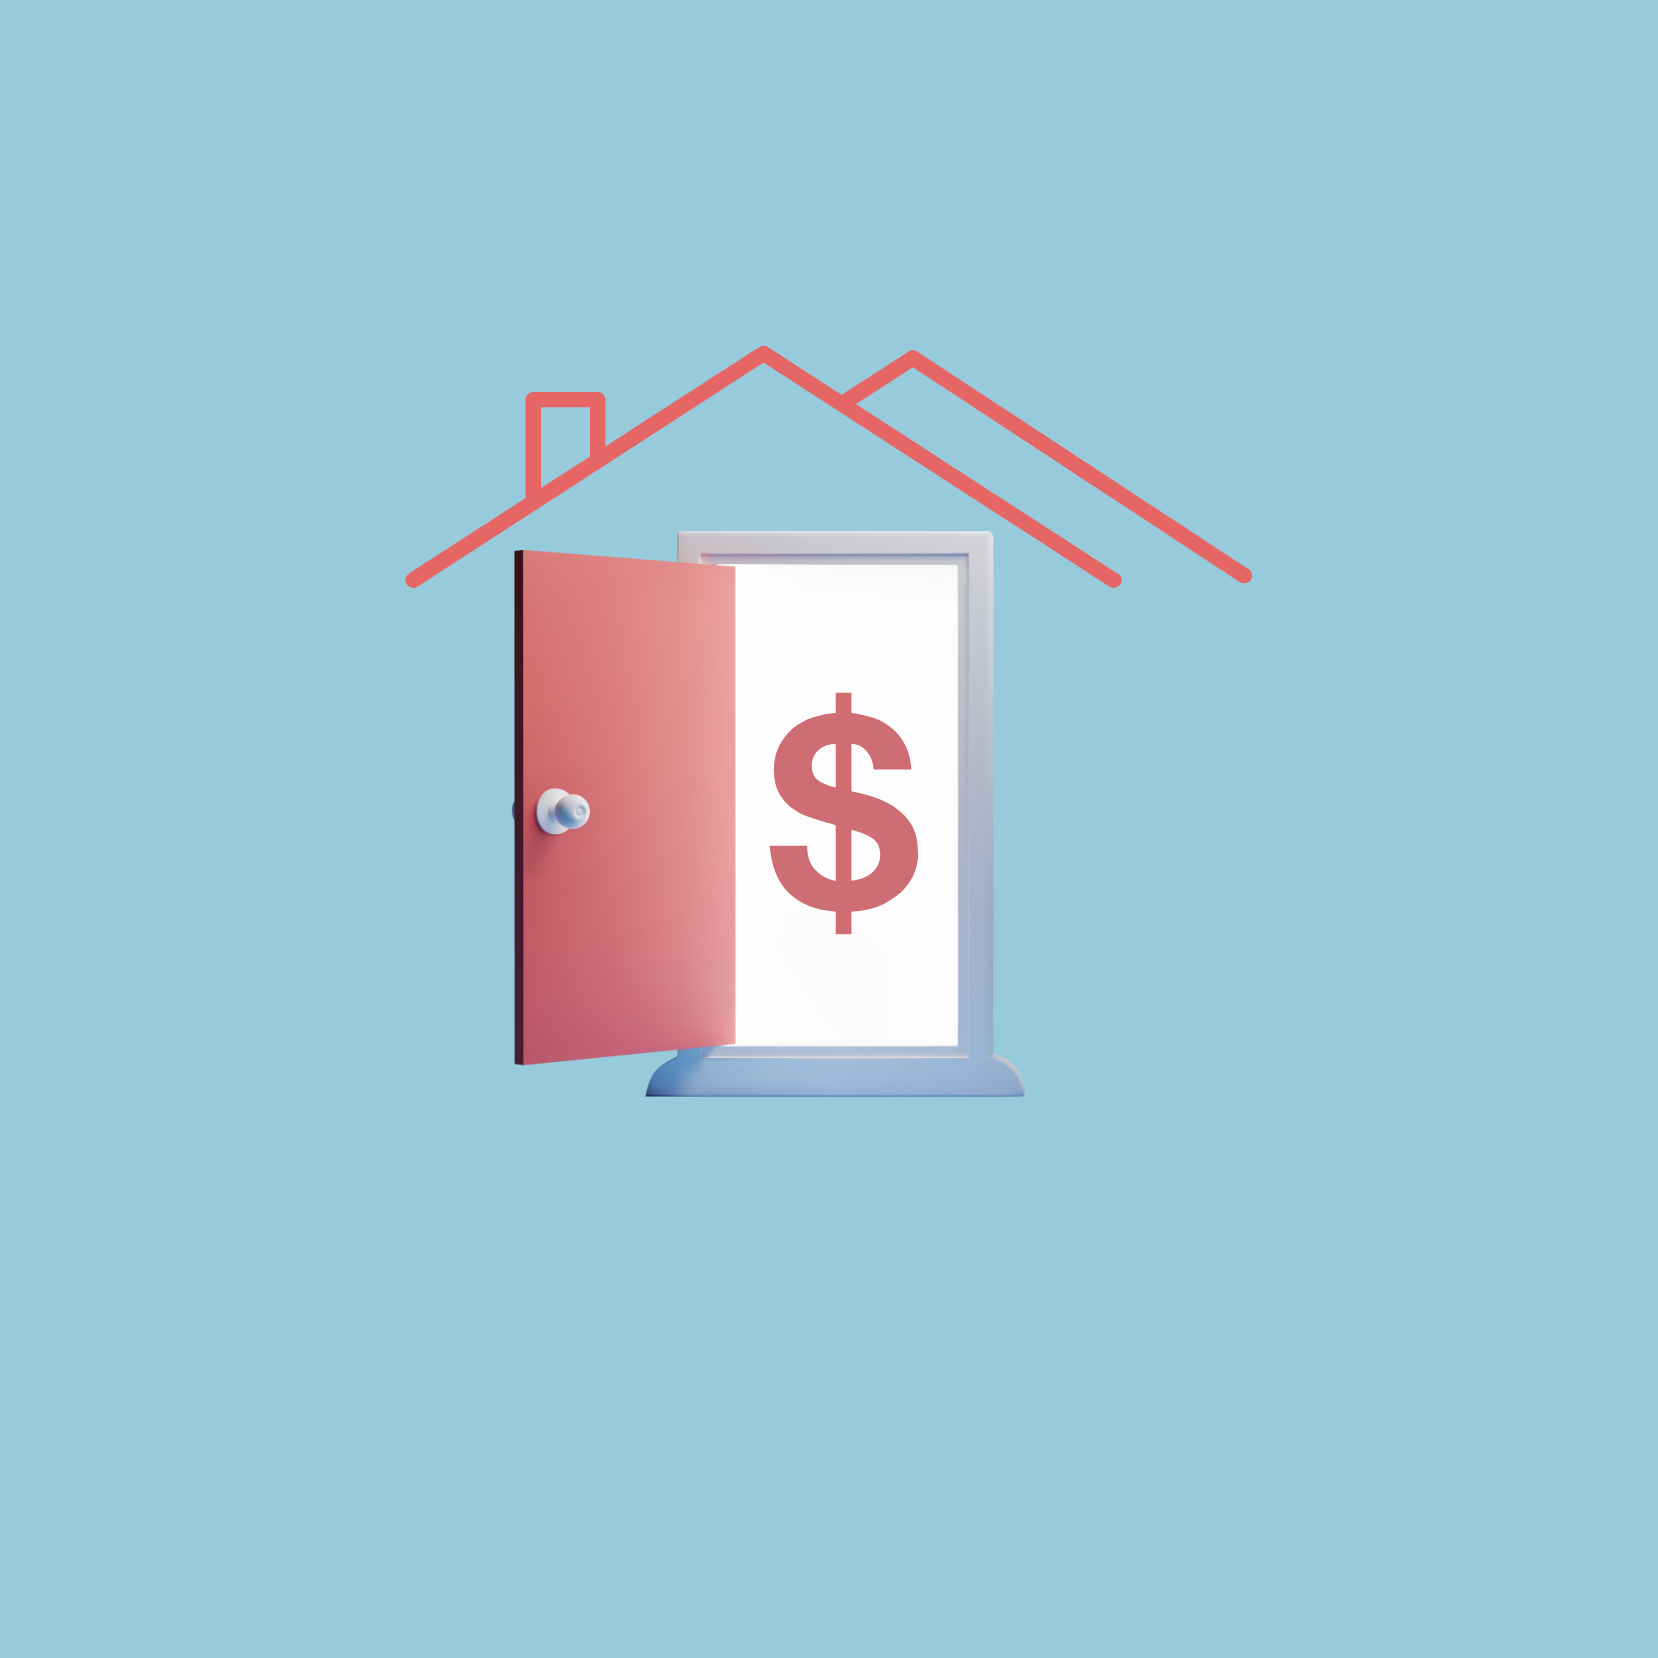 Illustration of a door and a home with a dollar sign.